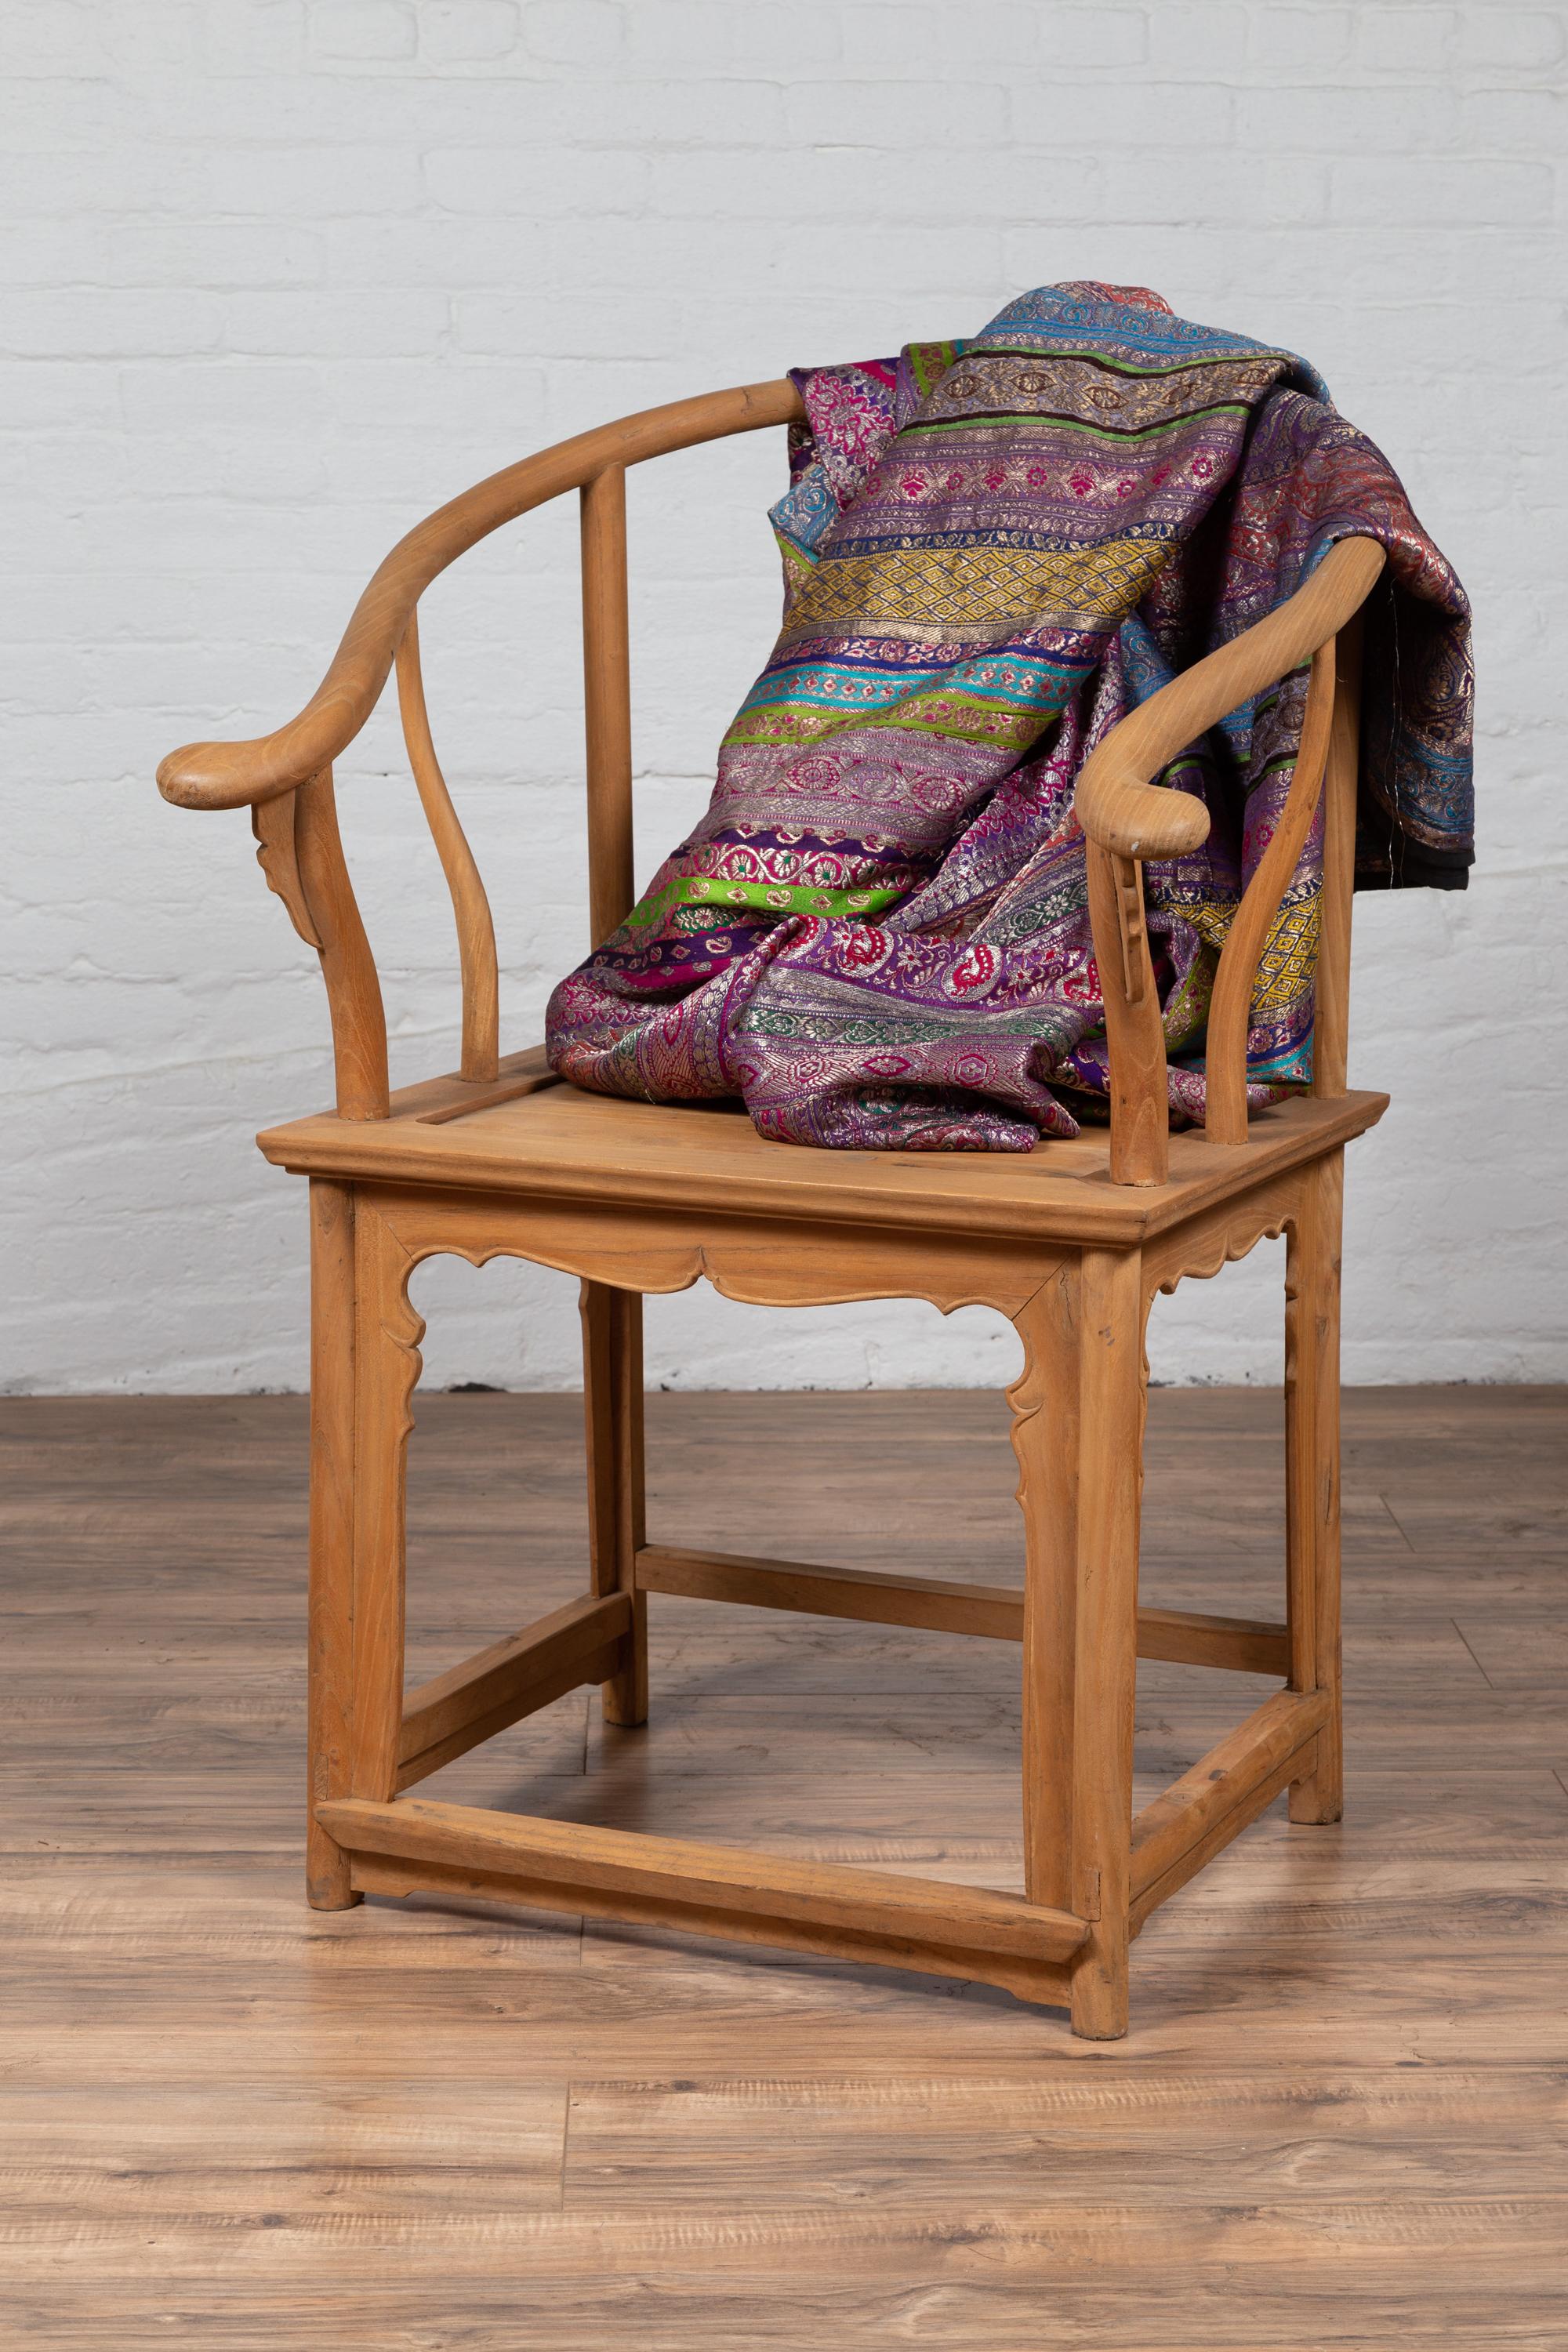 A Chinese vintage Ming dynasty style natural wood horseshoe back armchair from the mid 20th century, with carved splat and apron. Born in China during the mid-century period, this armchair charms our eyes with its natural wooden finish and graceful